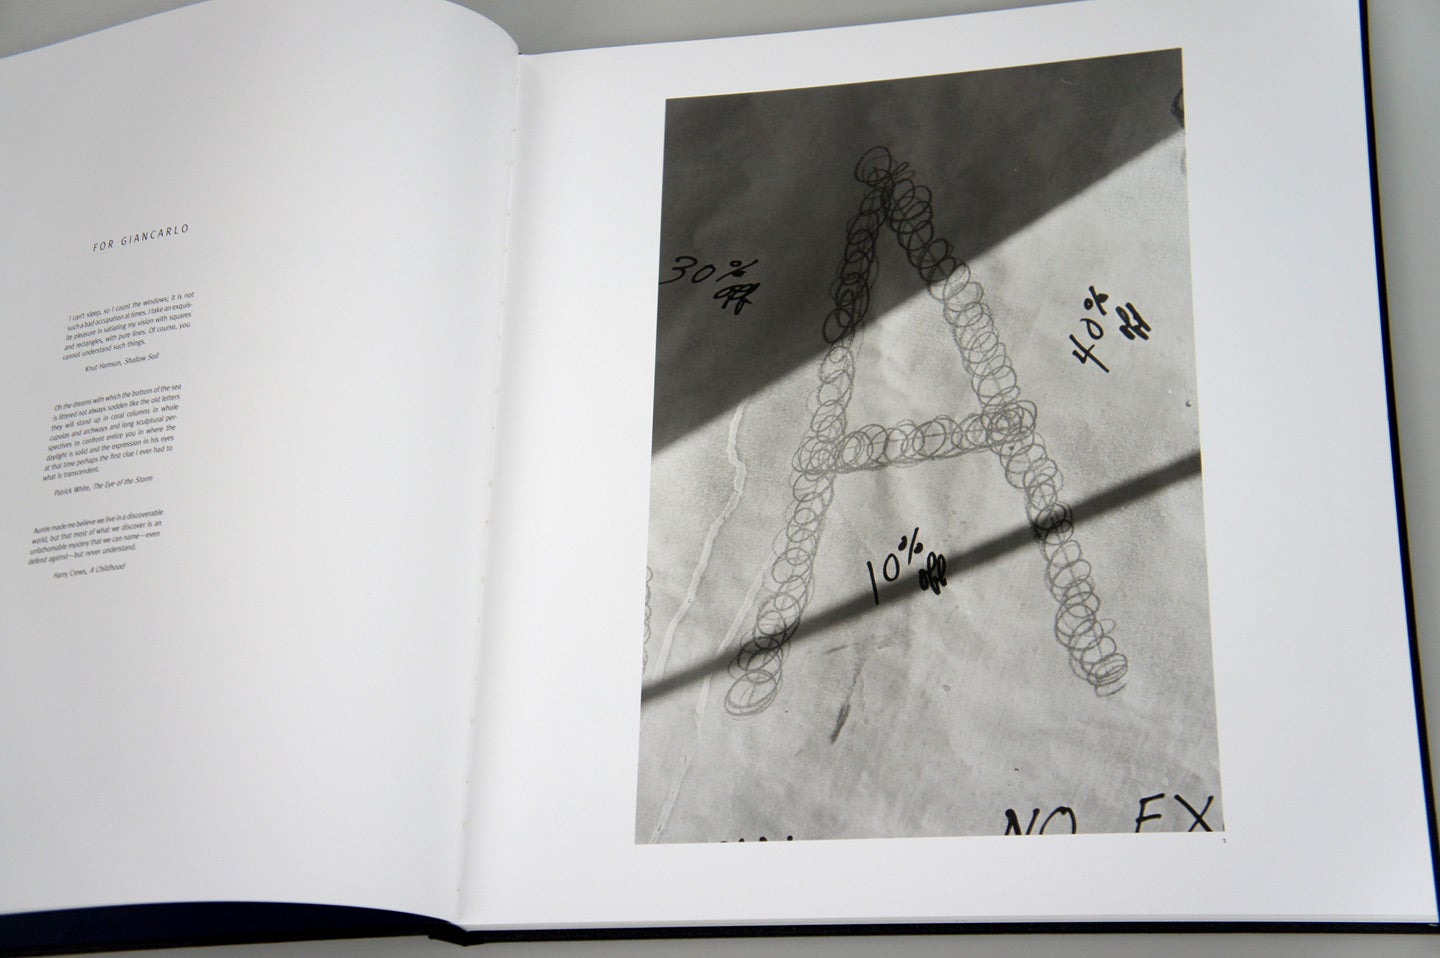 Lee Friedlander: Letters from the People (Special Limited Edition with One Vintage Gelatin Silver Print: "5")